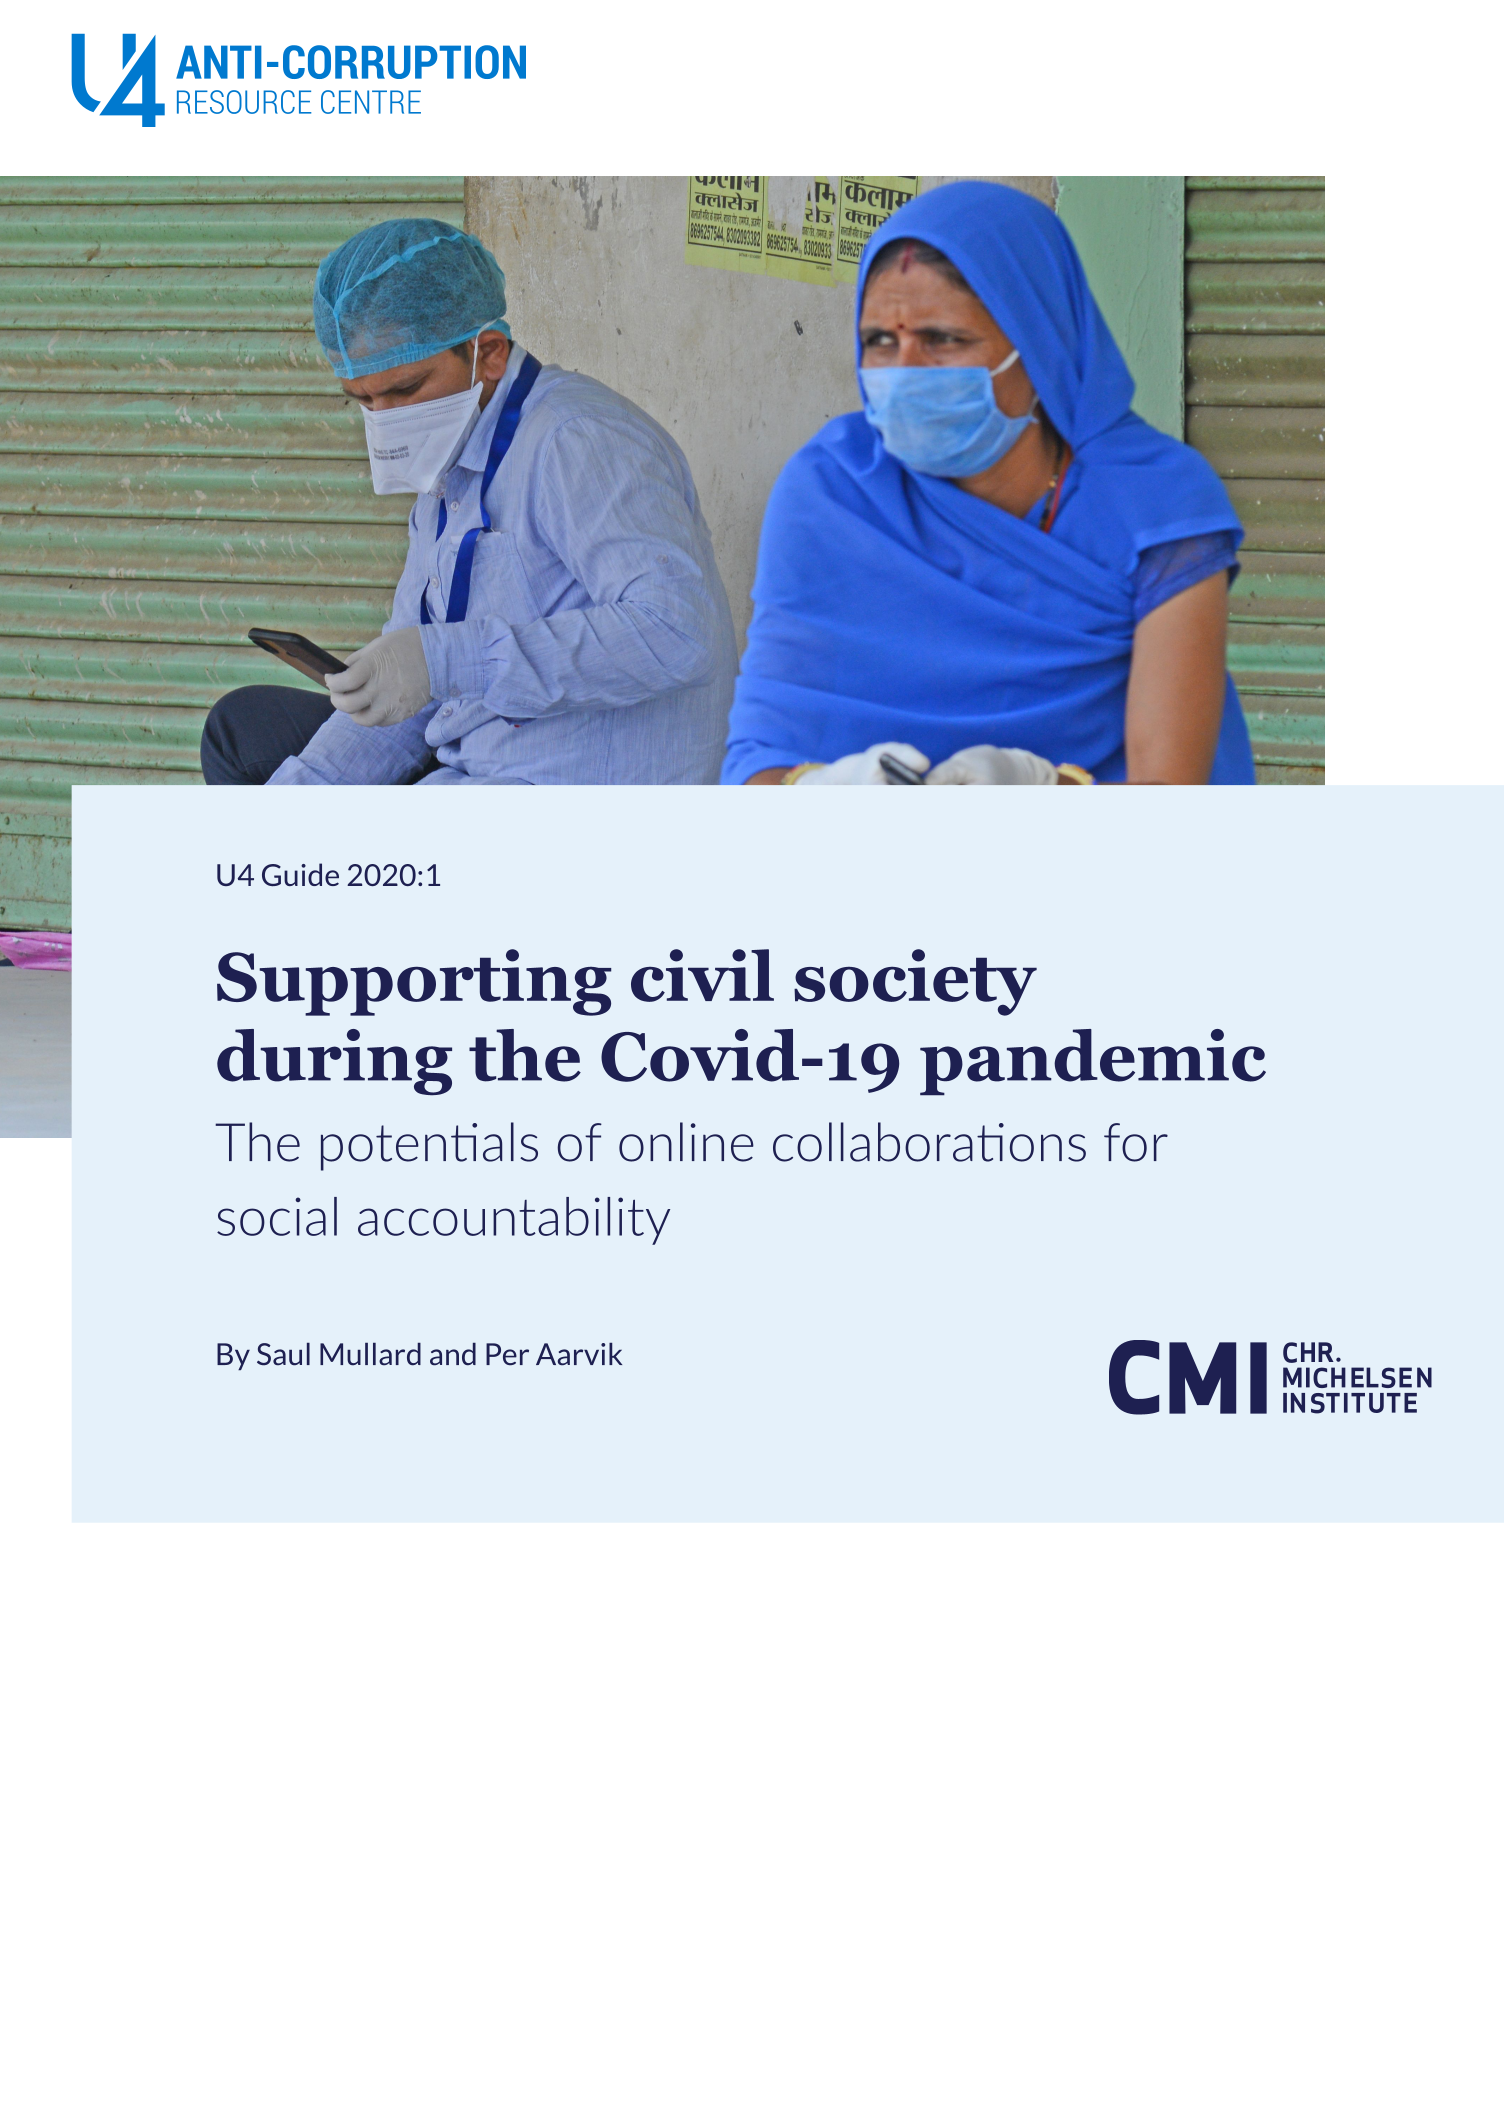 Supporting civil society during the Covid-19 pandemic